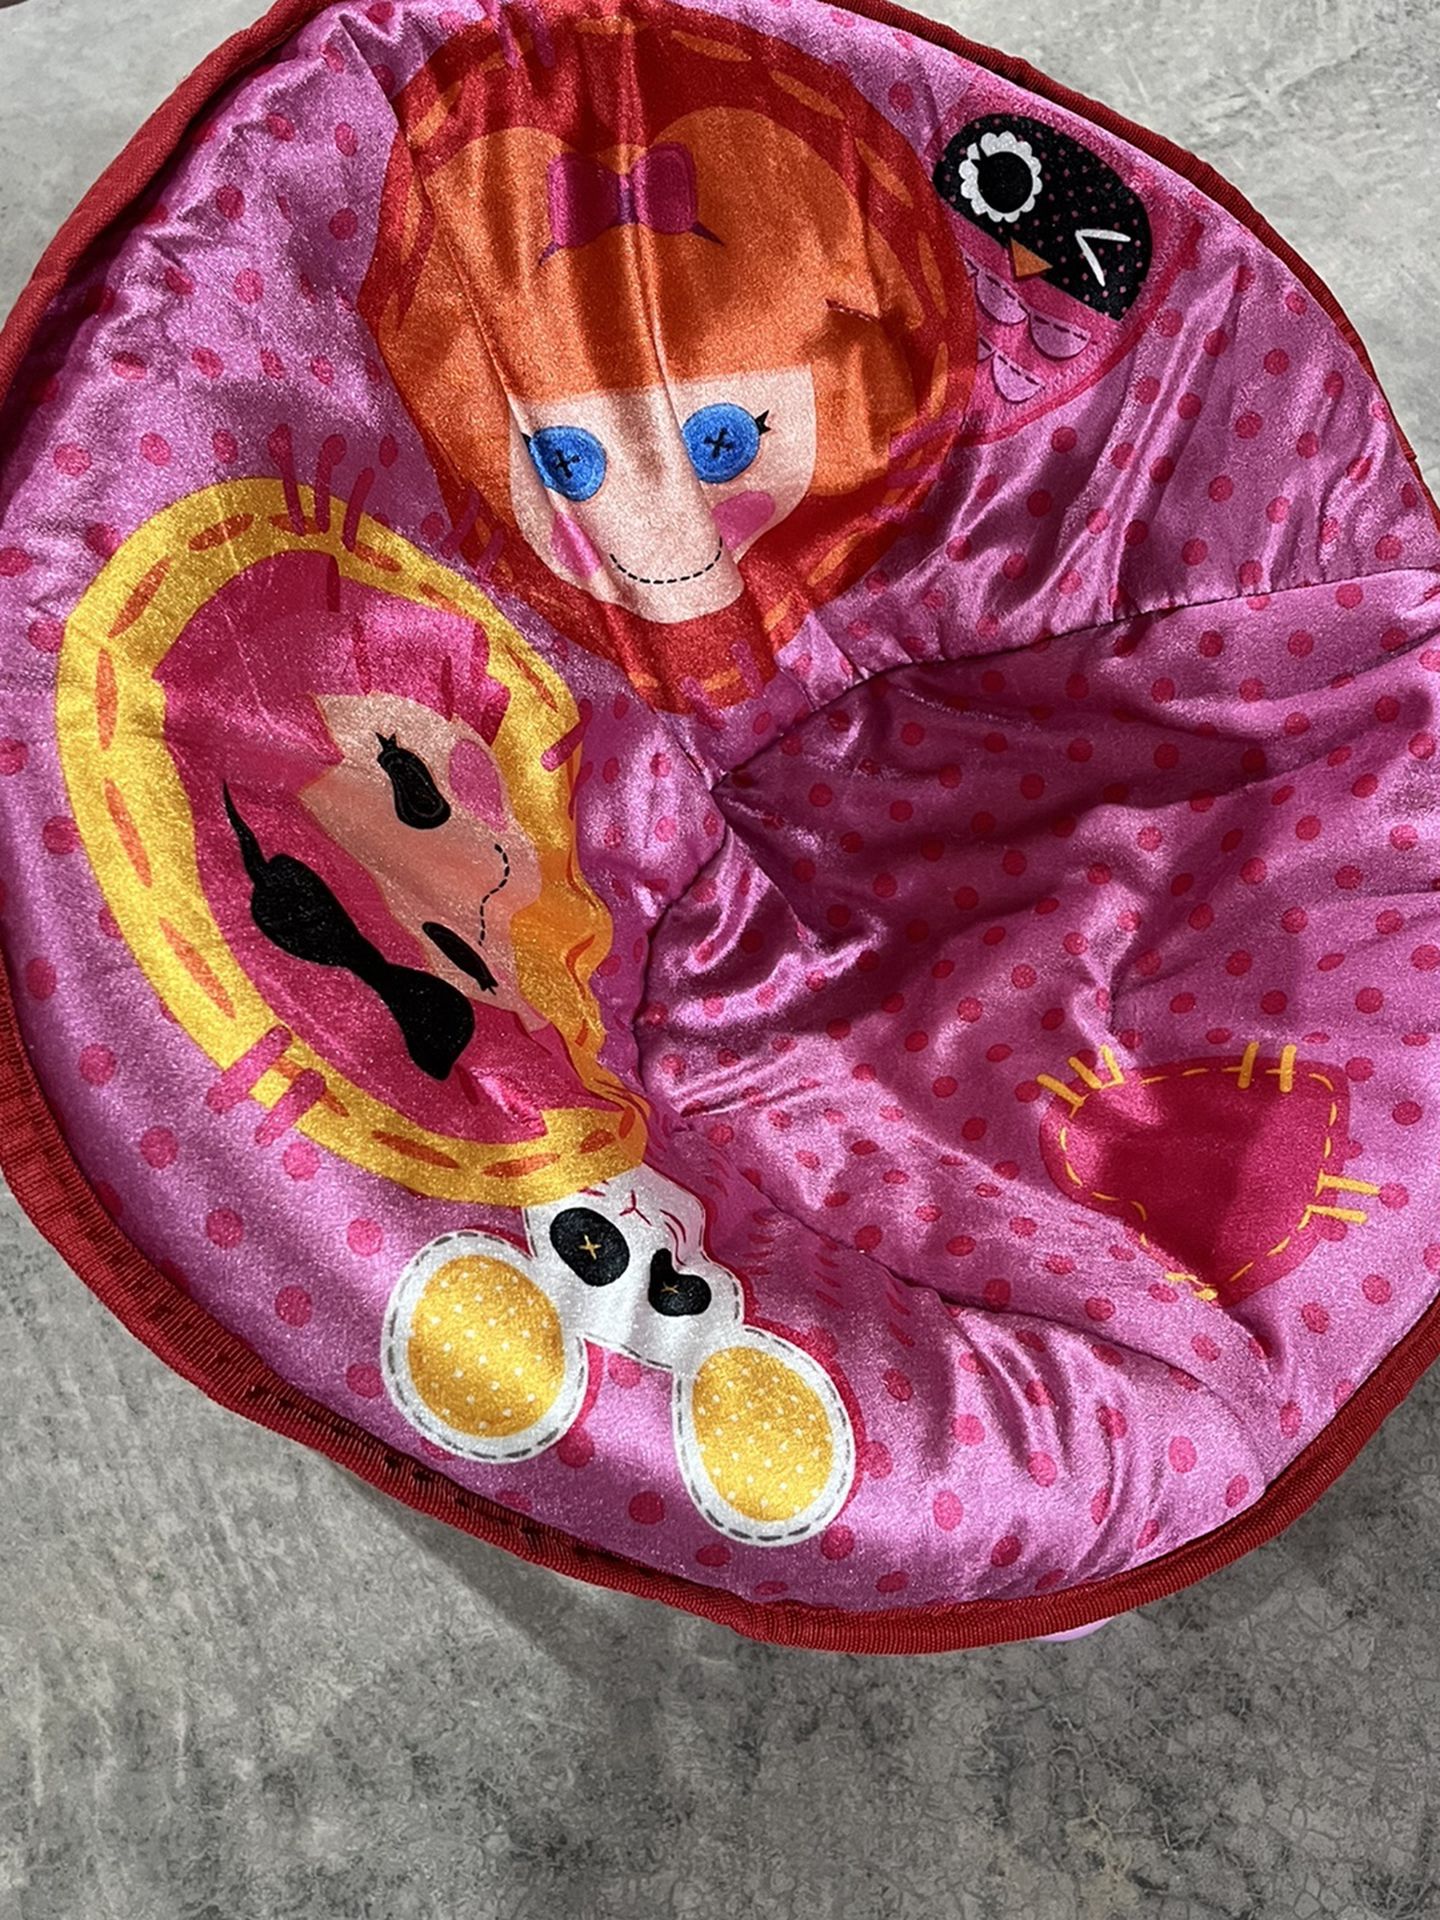 19” Toddler Lalaloopsy Mini Saucer Chair—oh so comfy